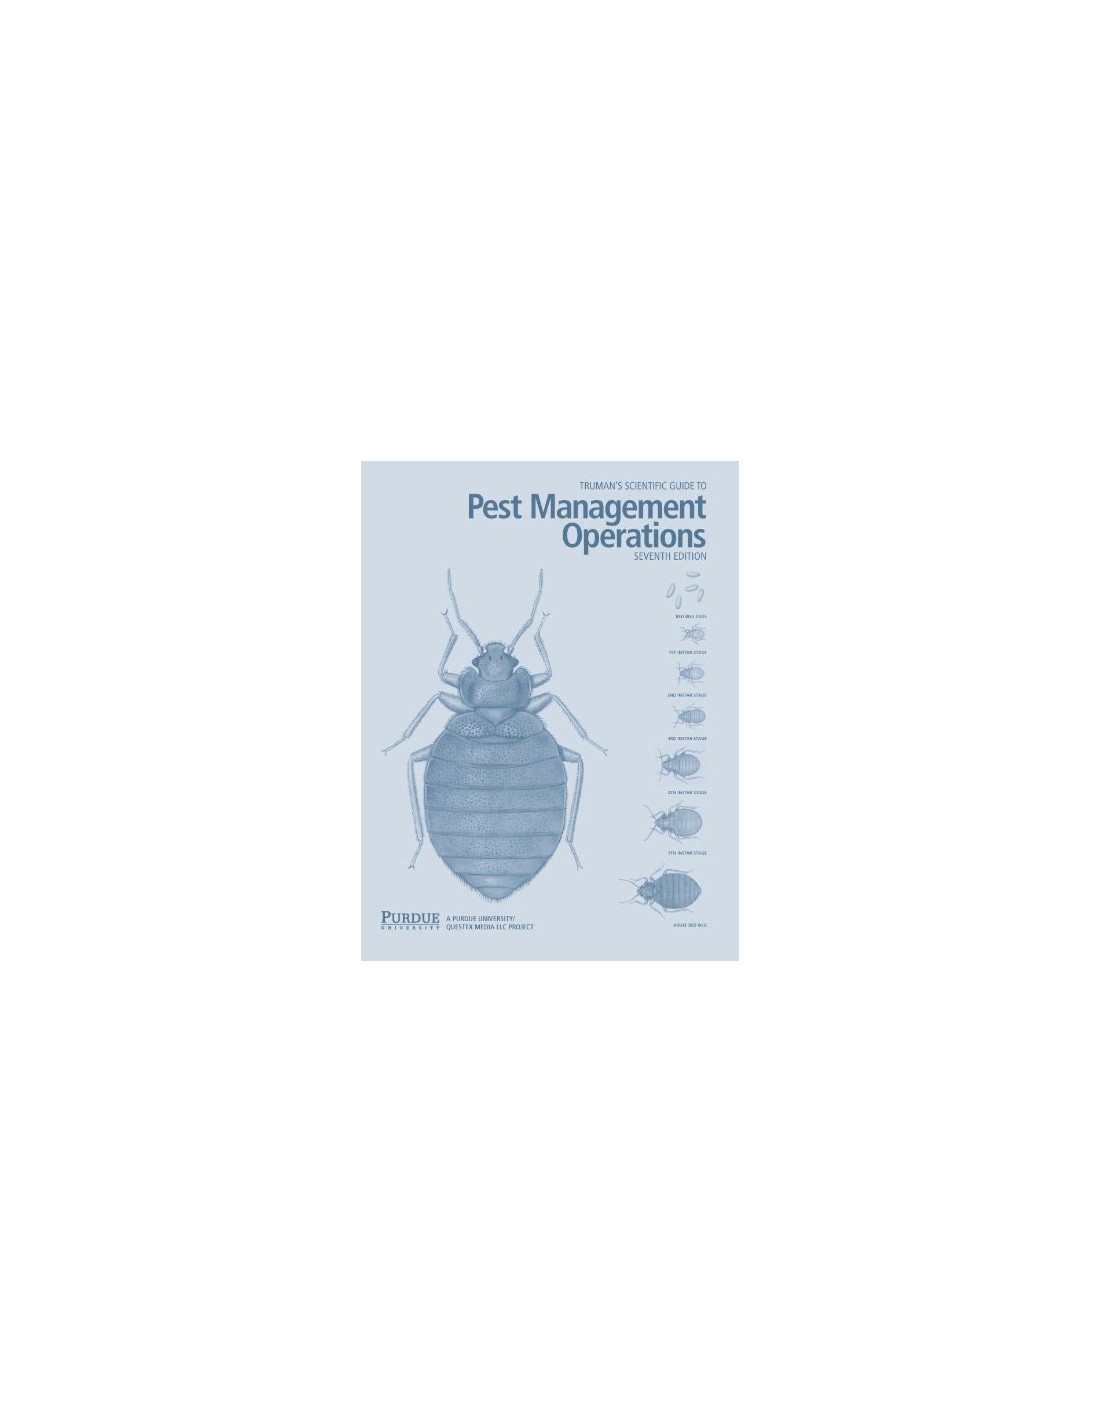 Truman's Scientific Guide To Pest Management Operations BOOKSCIGUIDE Questions & Answers